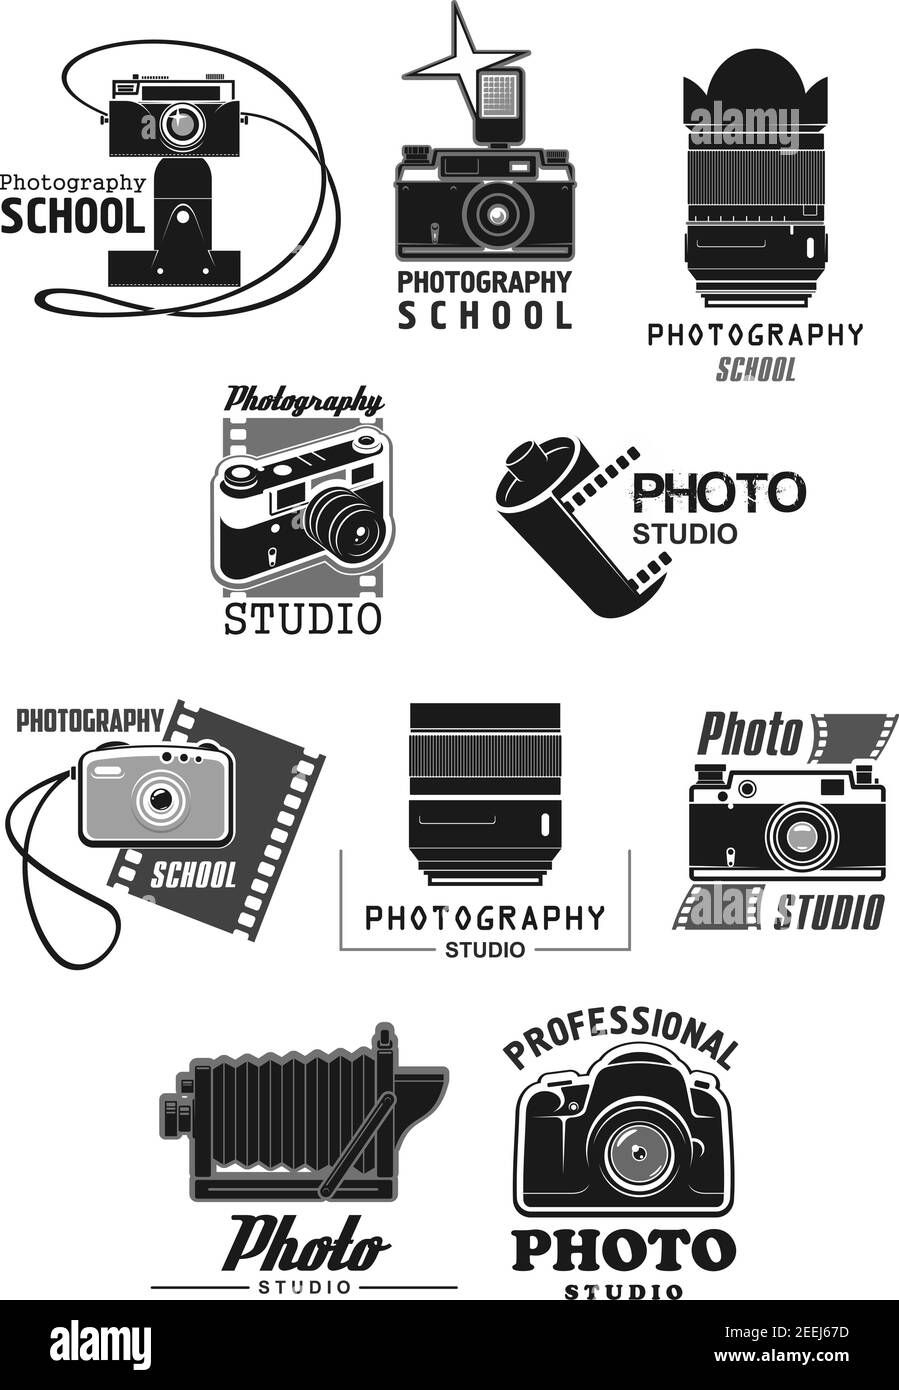 Icon Of Snapshot Camera With Flash Royalty Free SVG, Cliparts